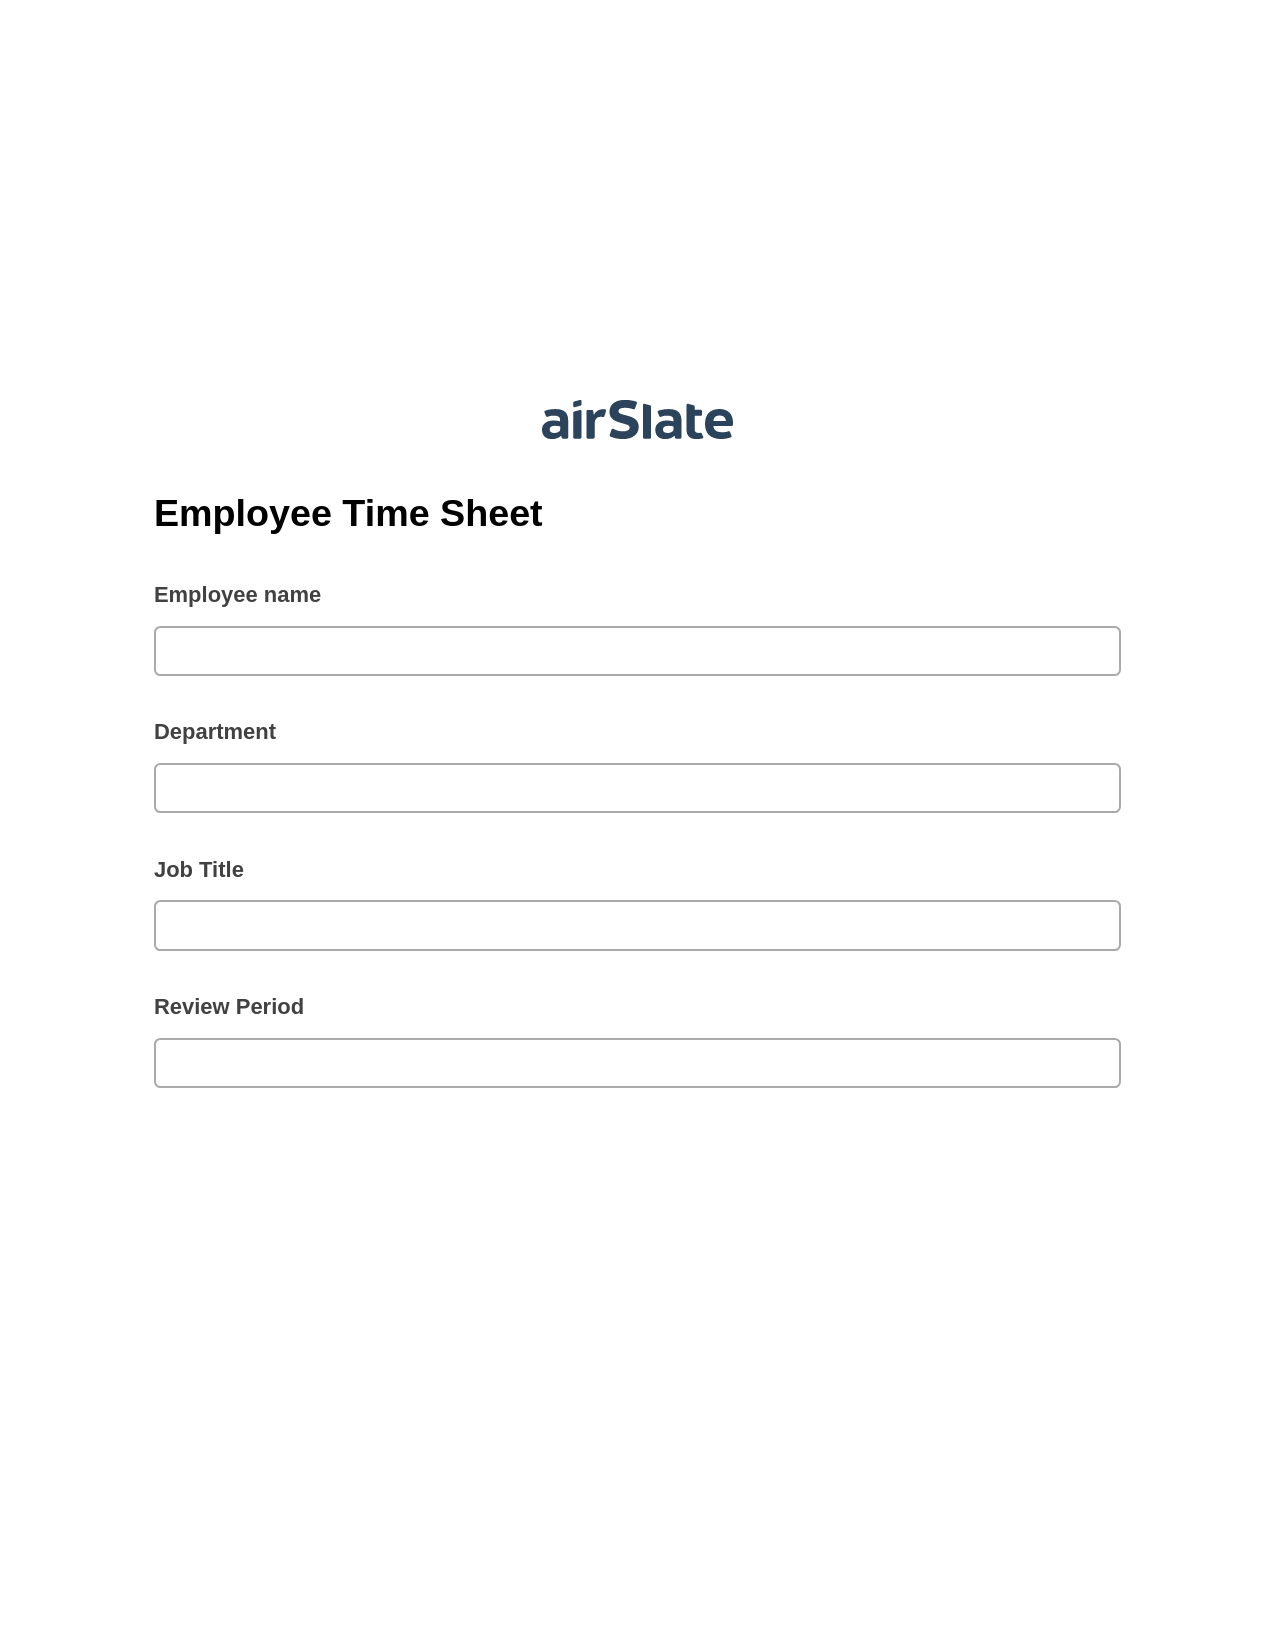 Multirole Employee Time Sheet Pre-fill from CSV File Bot, Update Audit Trail Bot, Export to WebMerge Bot